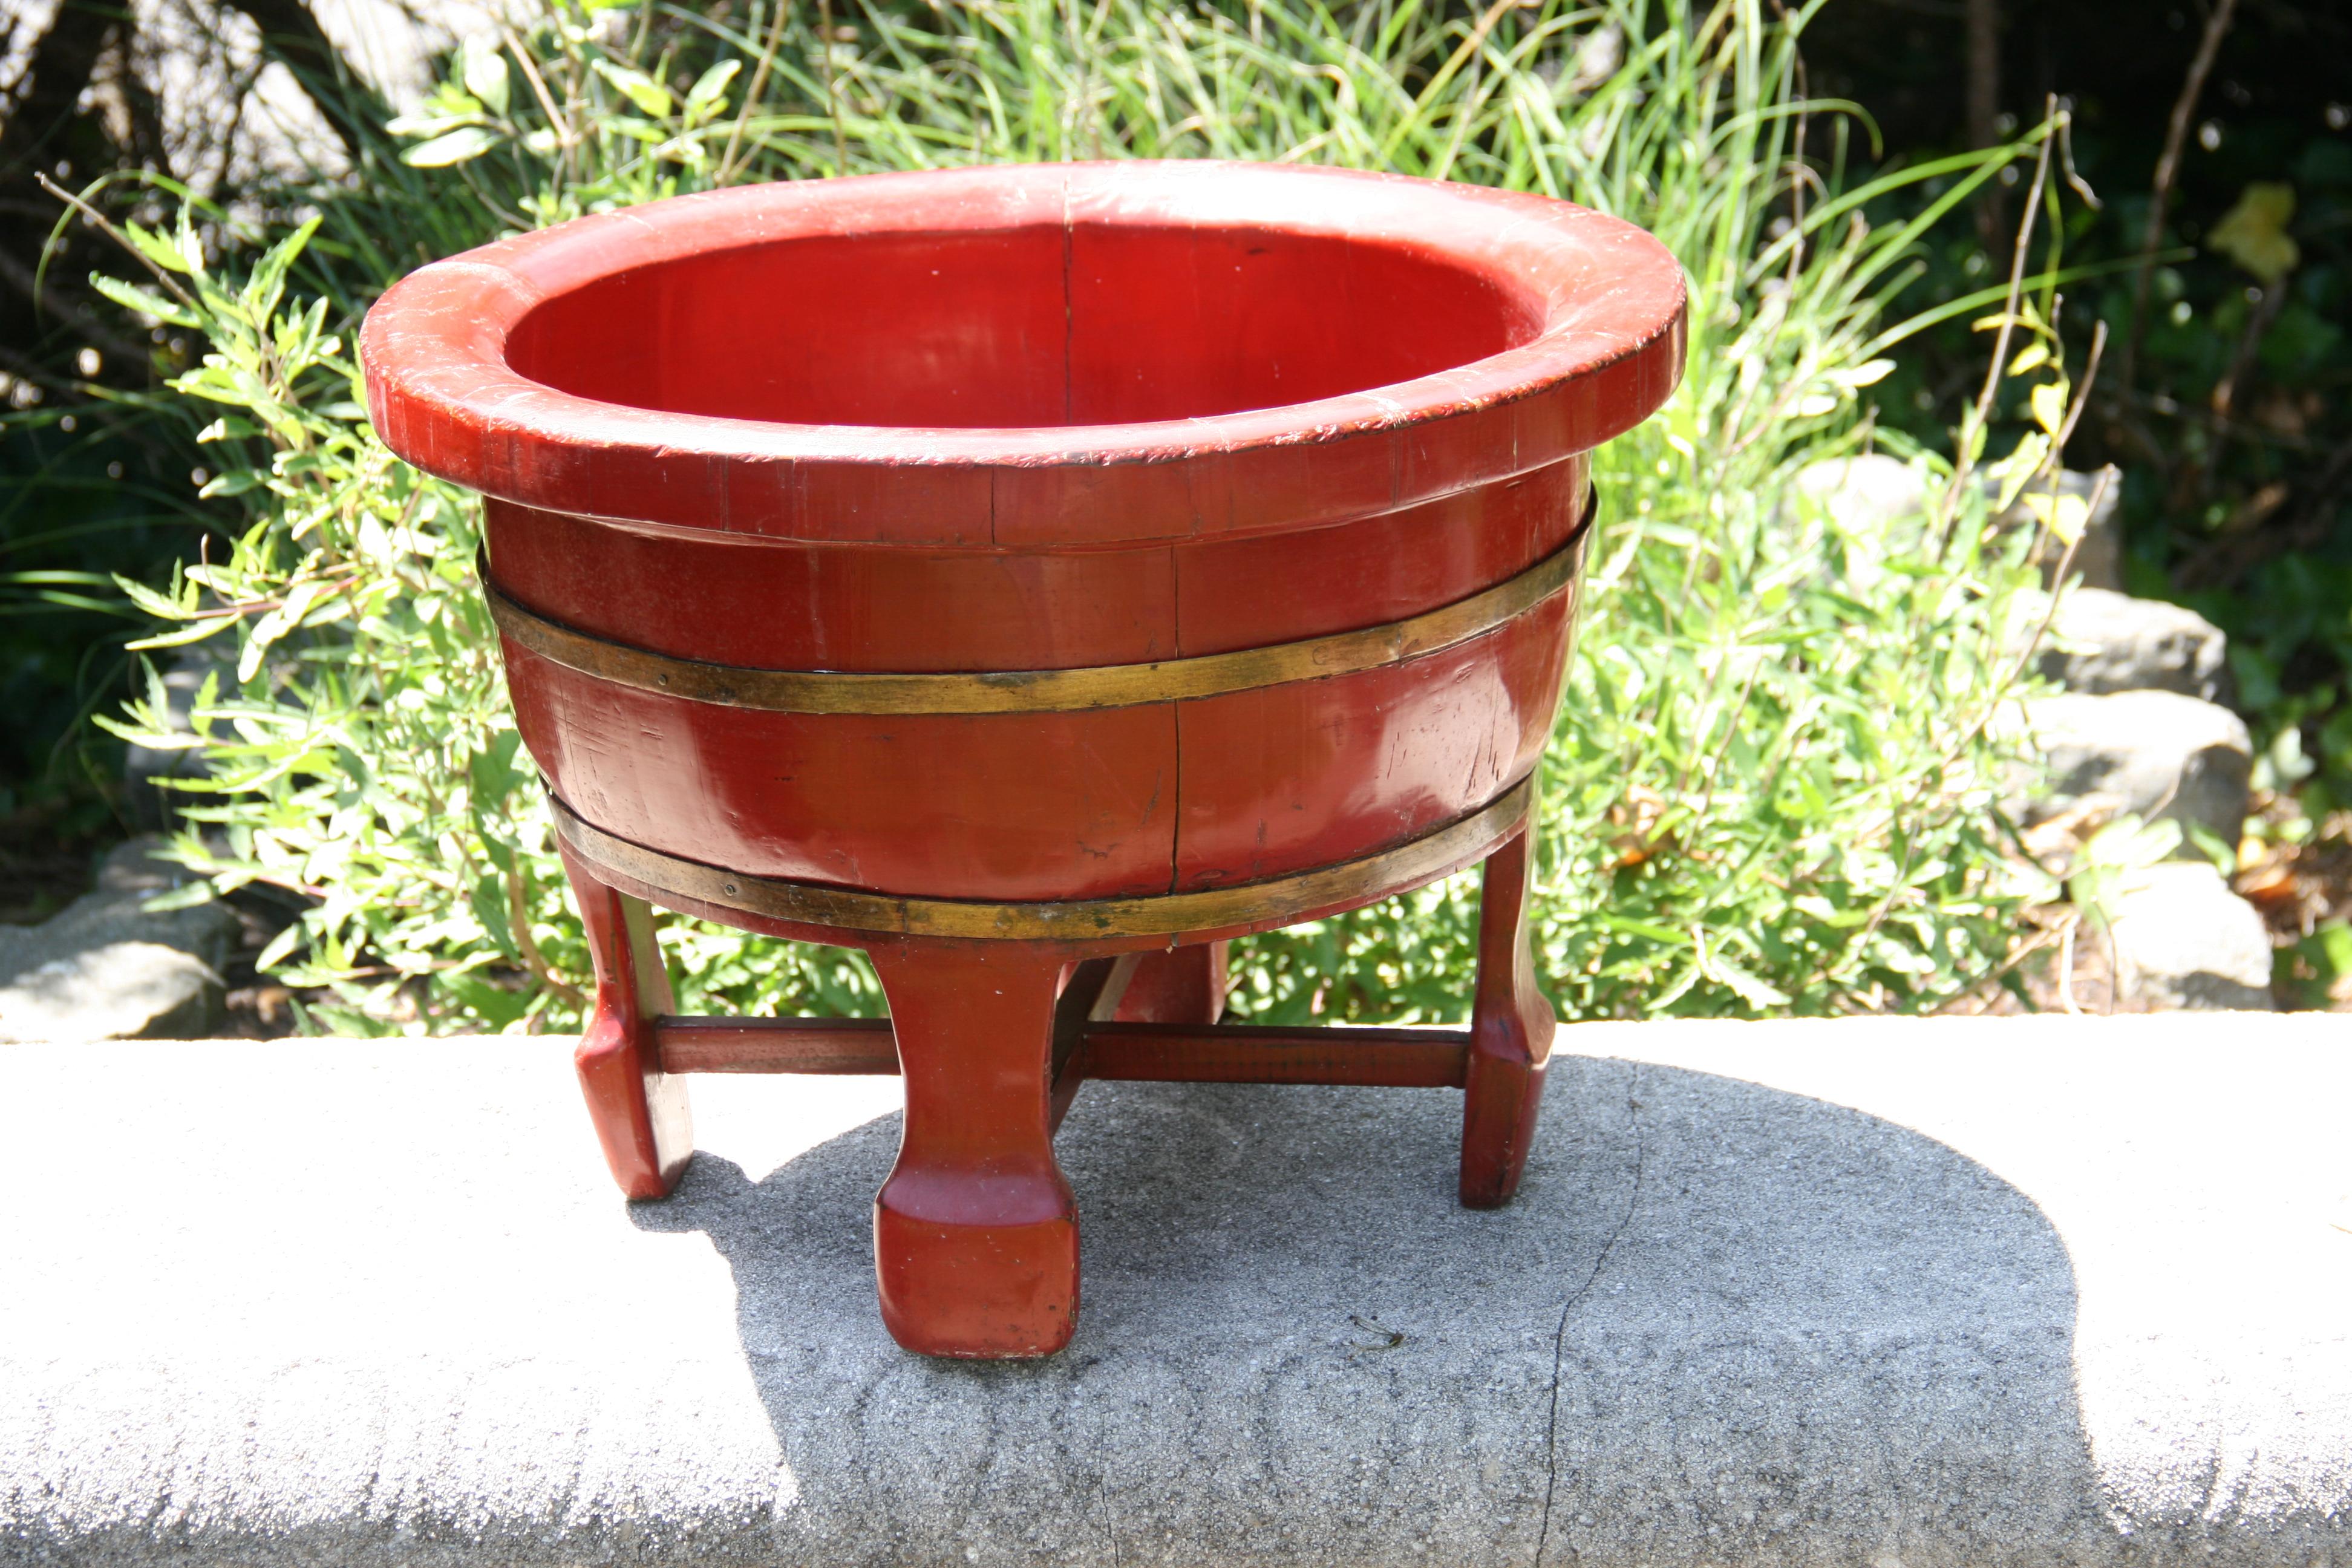 3-557 Large red painted Barrel footed plant stand with brass banding
Inside diameter 15.5